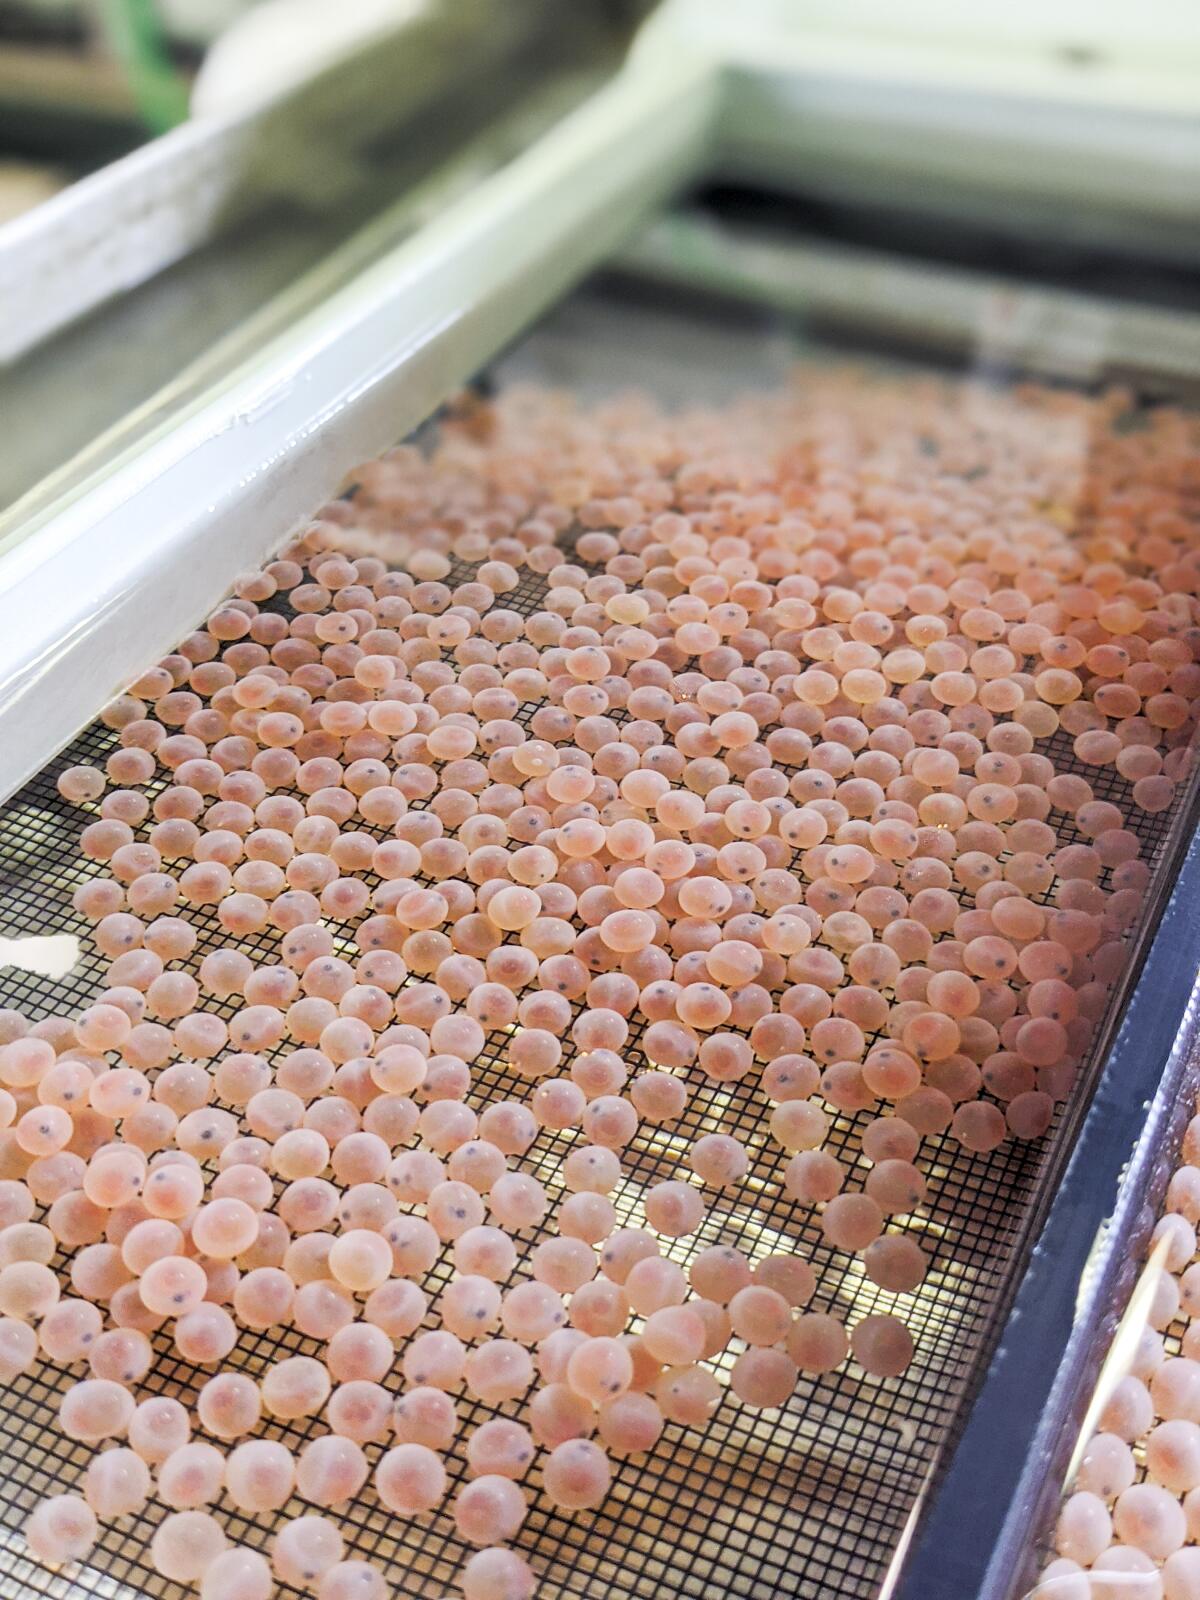 A layer of pink salmon eggs cover a screen.